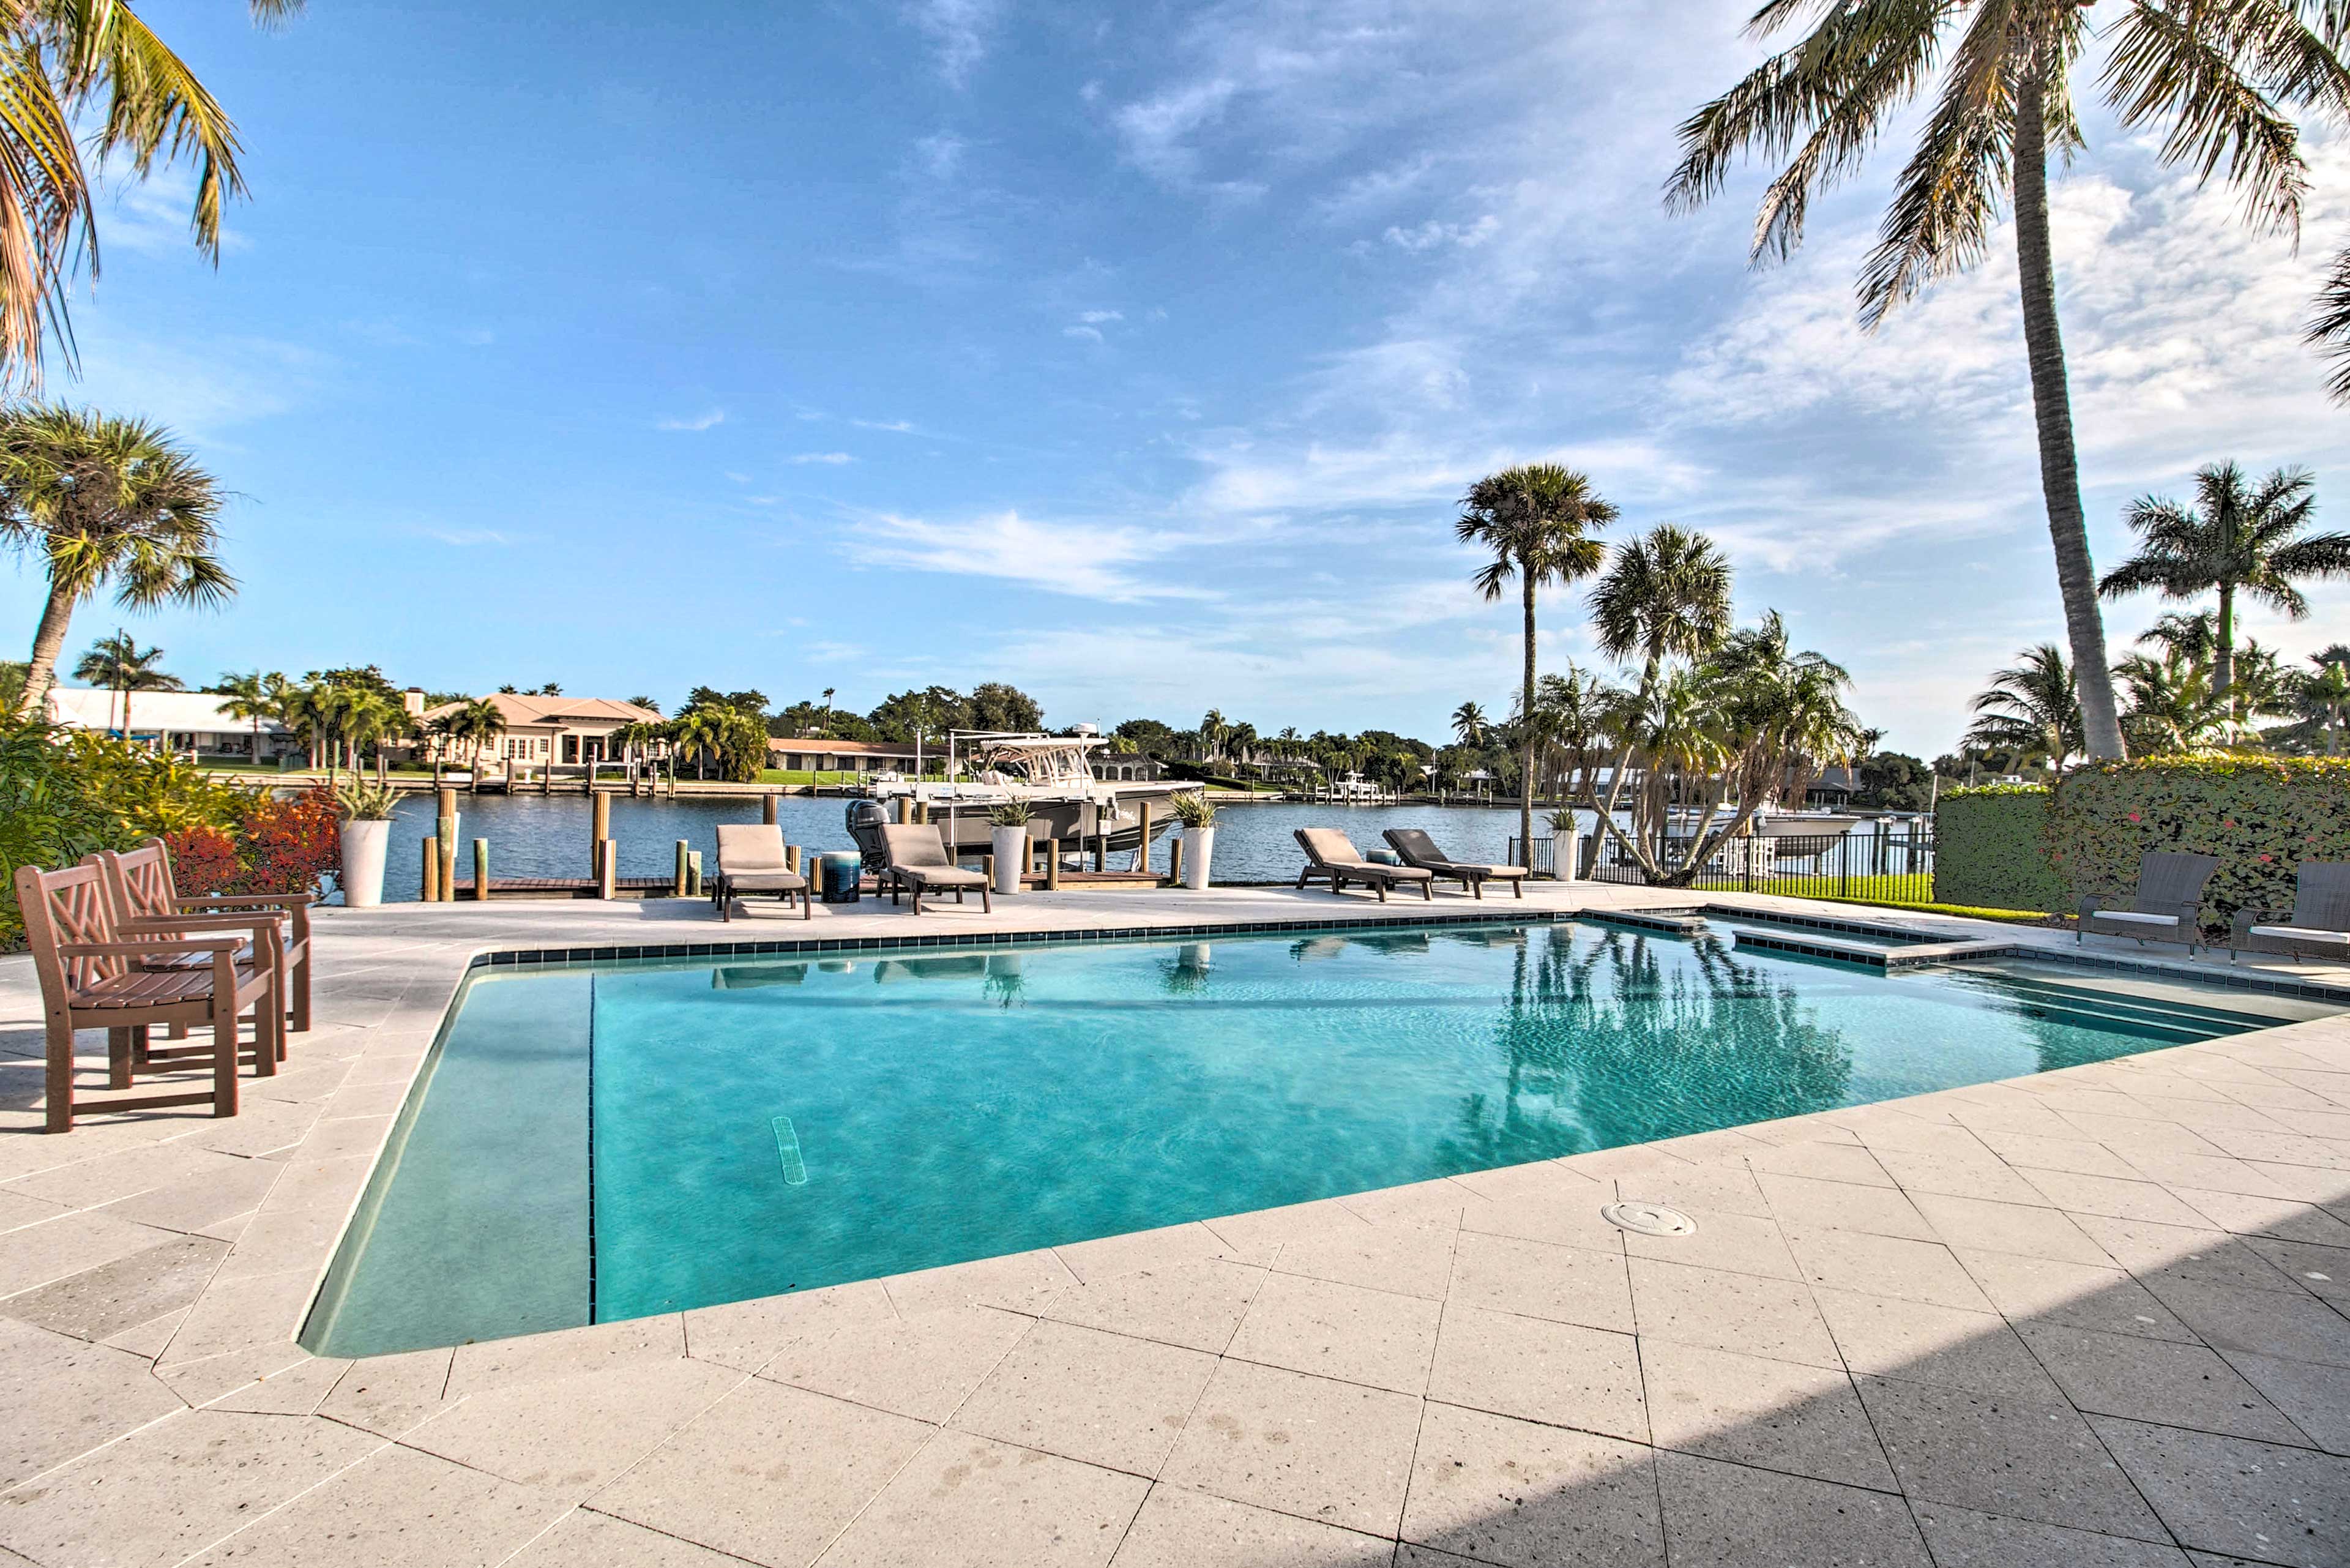 Beat the Florida heat with this top-notch private pool (not heated).